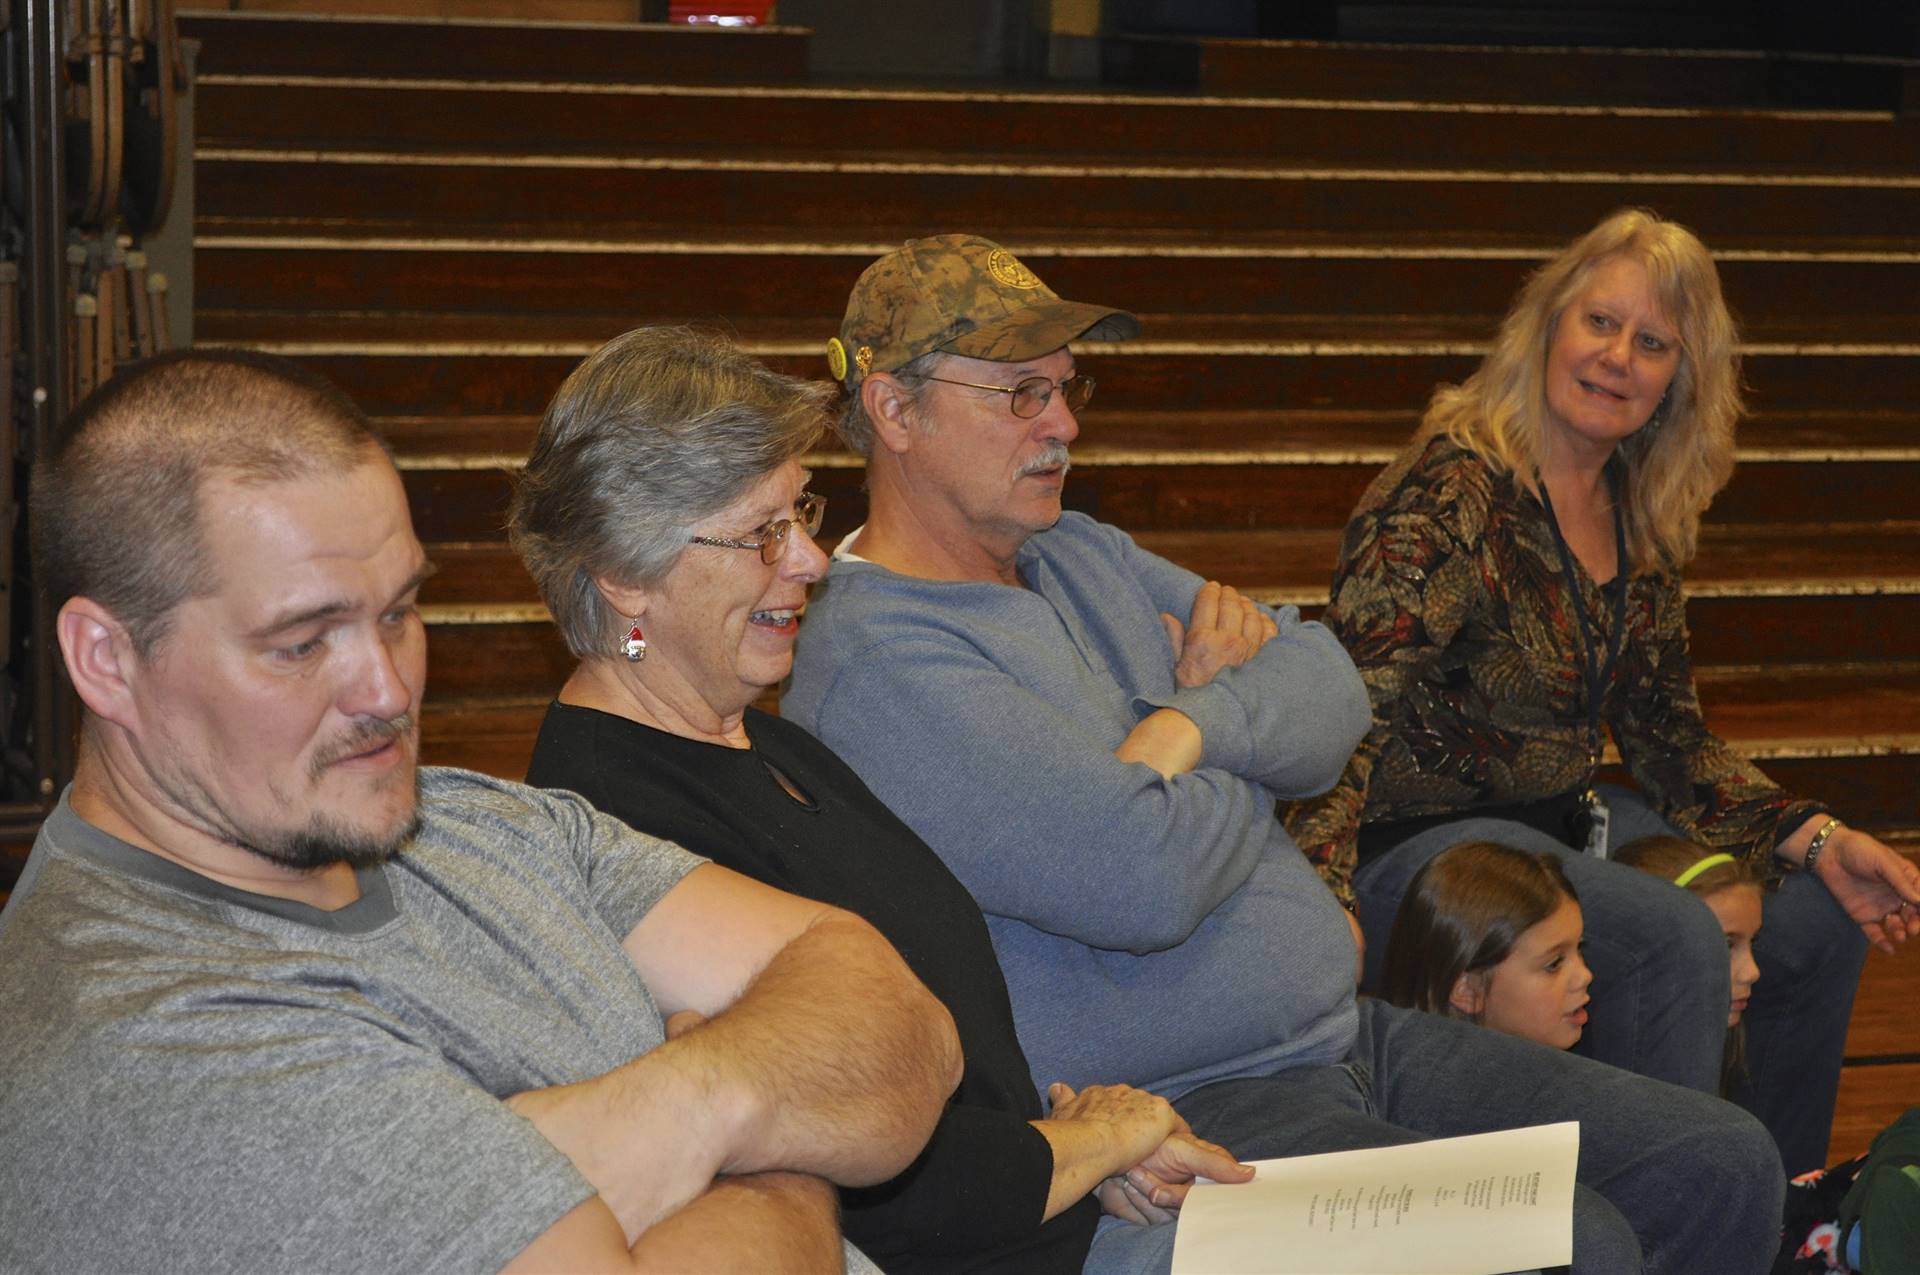 Mrs. Butcher's friends and family watch the assembly.